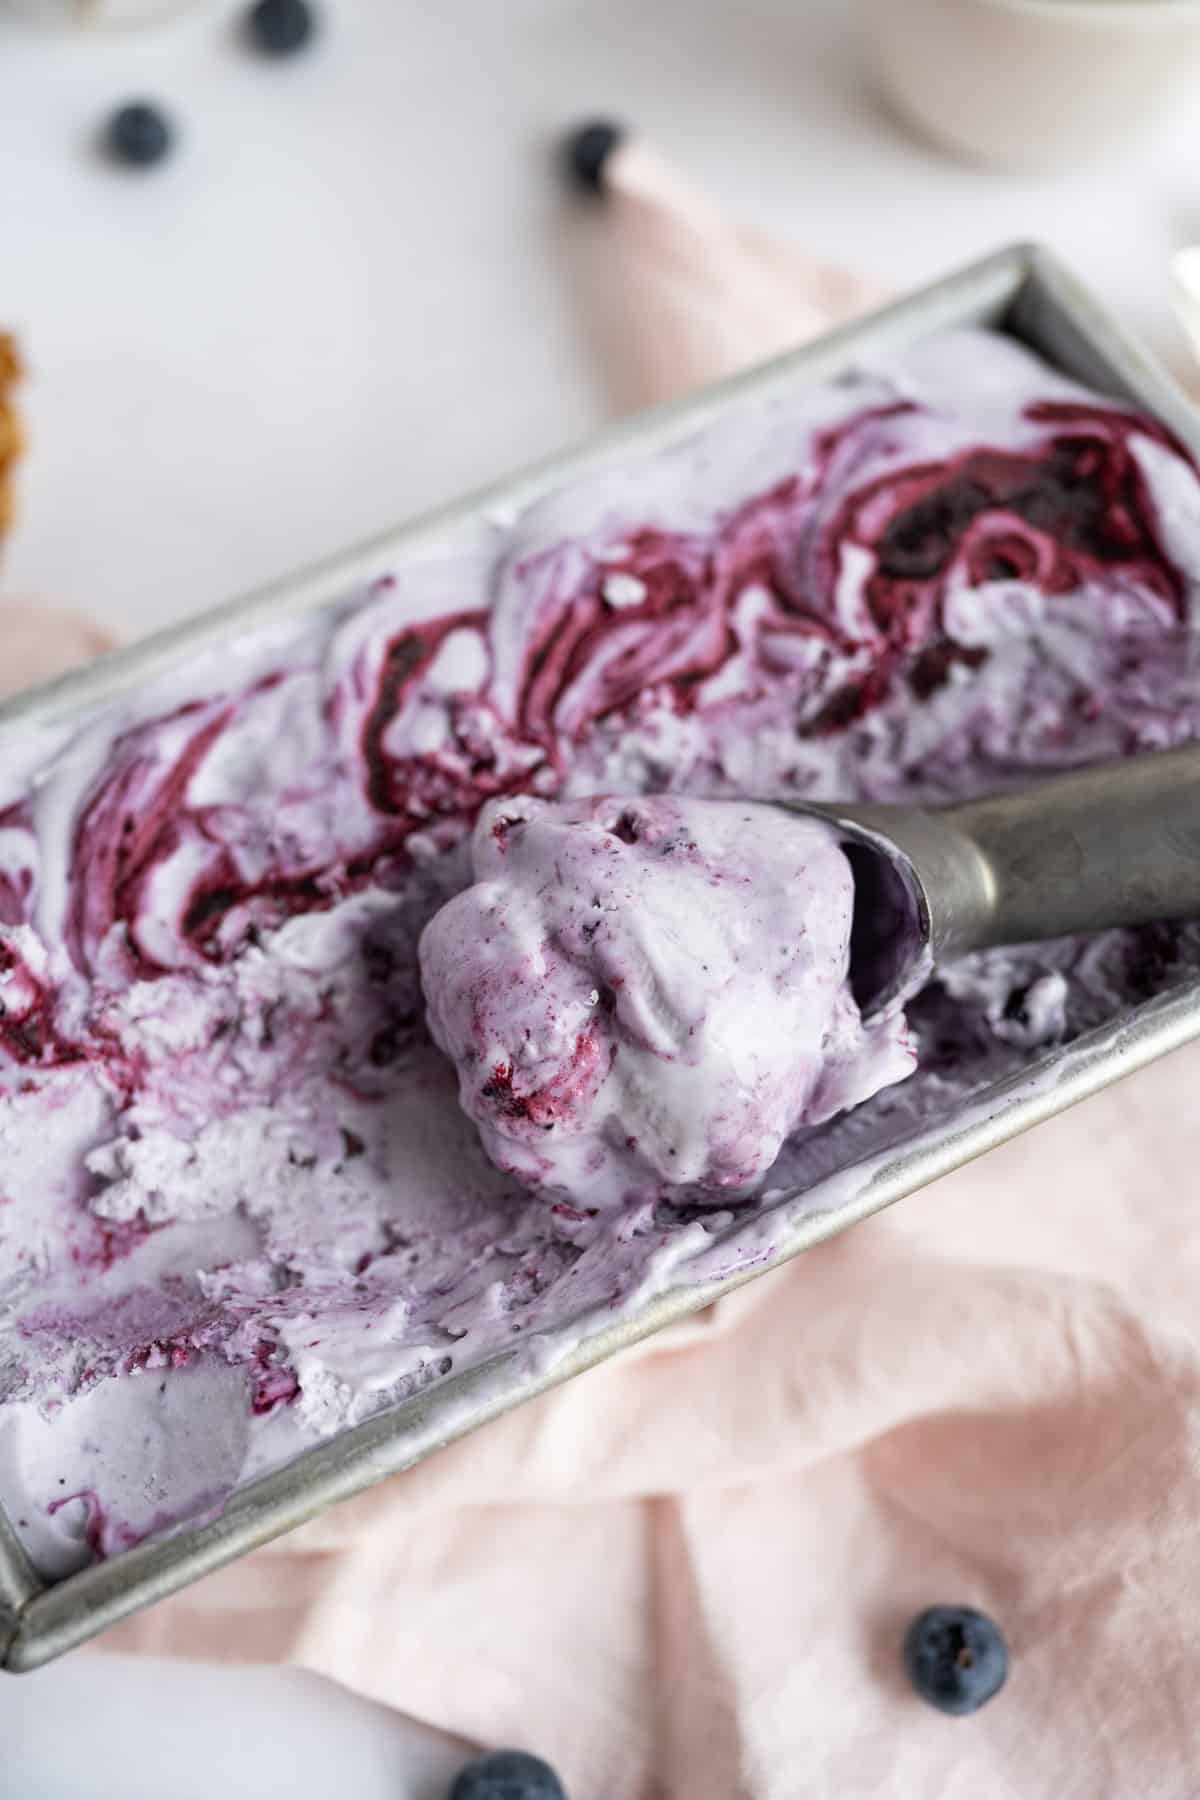 A metal loaf pan filled with no-churn blueberry ice cream being scooped with an ice-cream scoop.